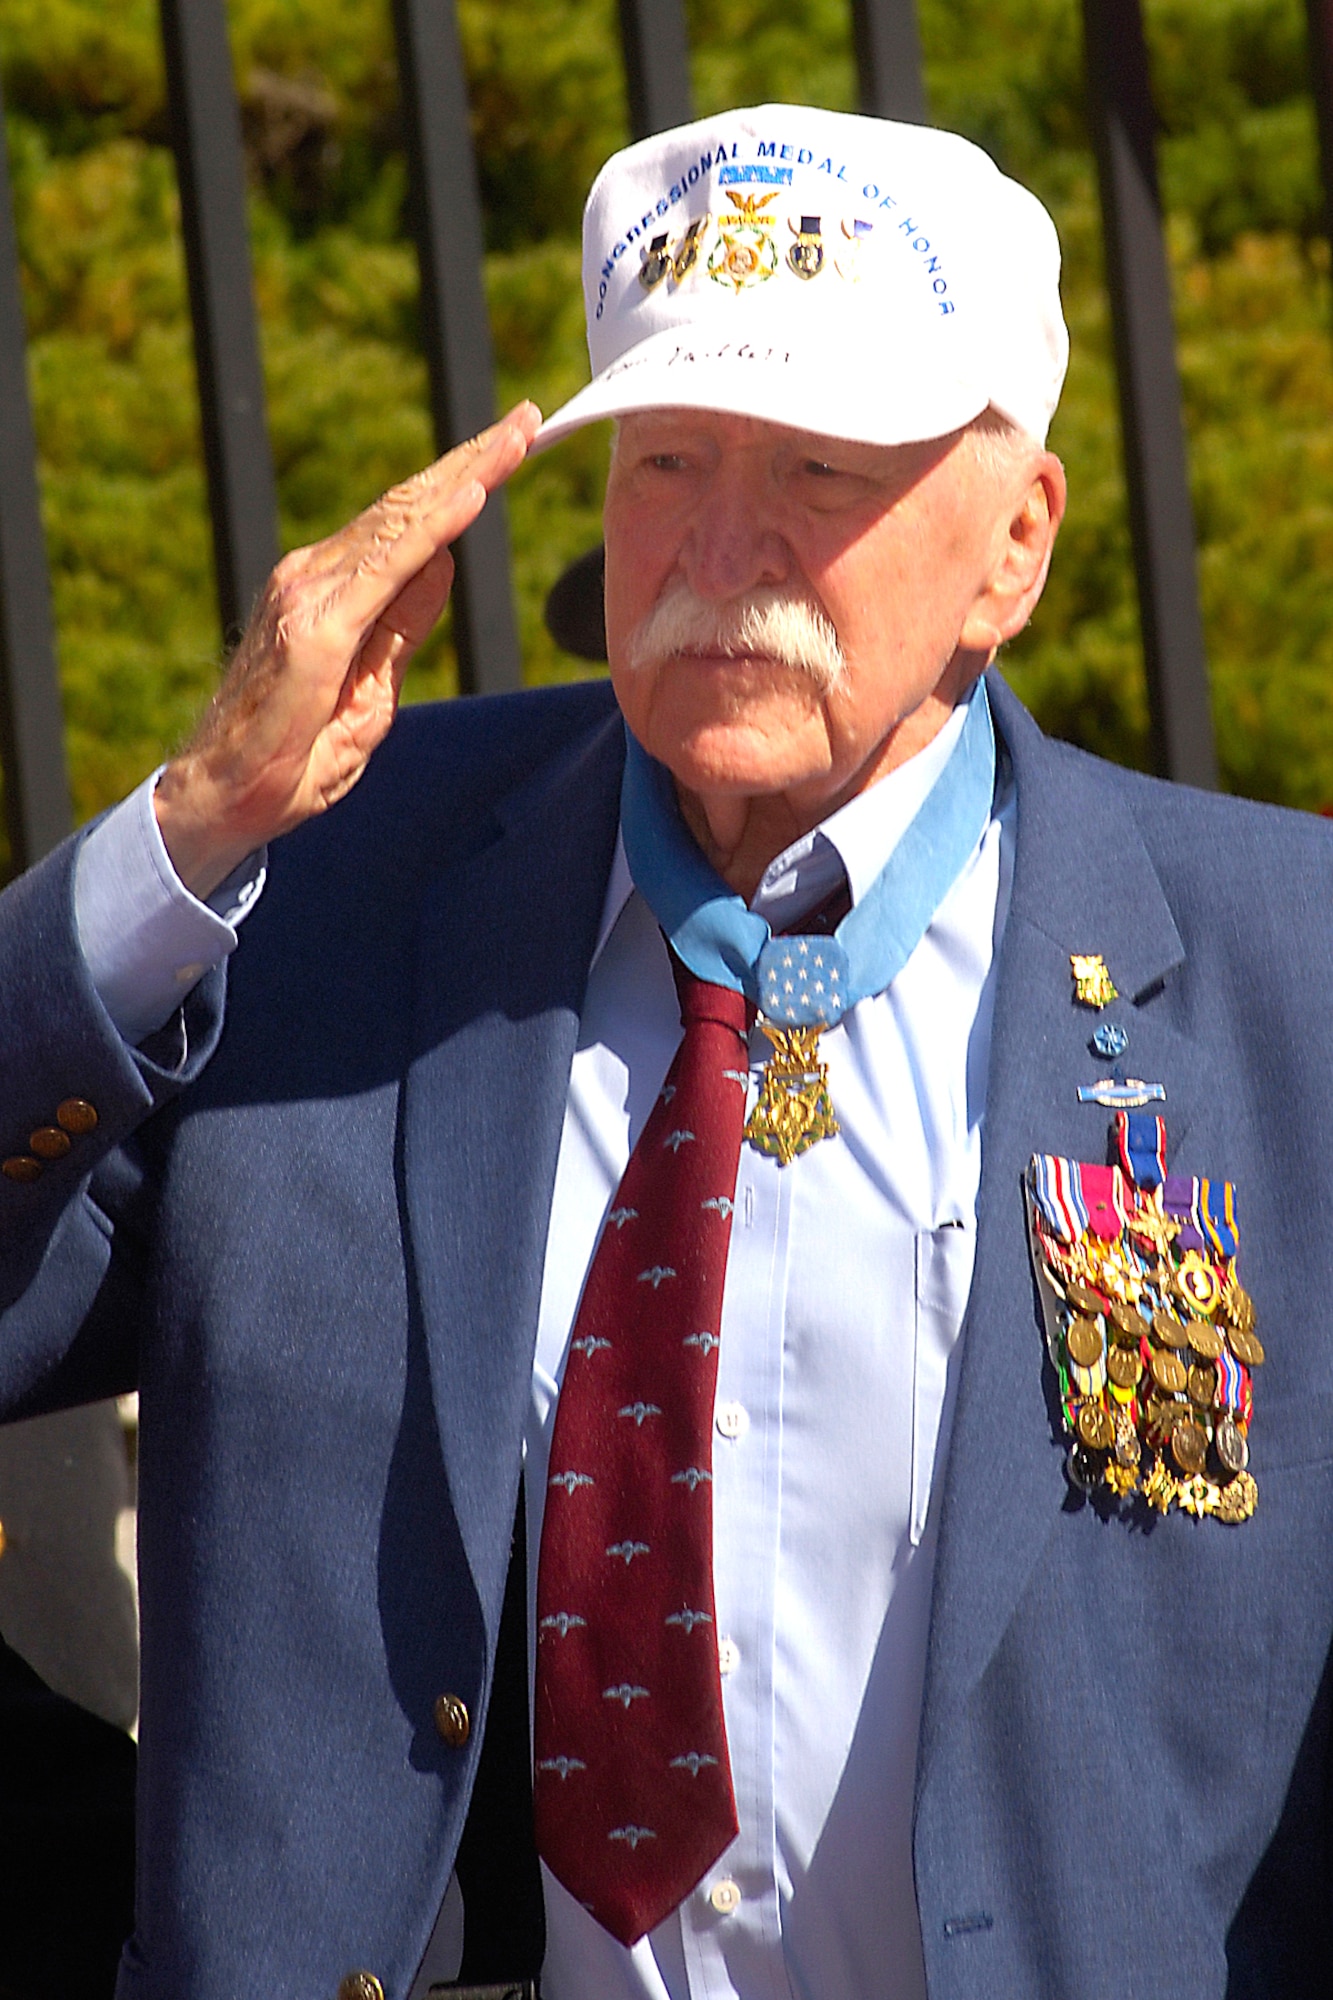 Retired Army Col. Lewis Millett offers a salute during a special ceremony Sept. 27 at the State House in Boston.  The ceremony honored more than 70 Medal of Honor recipients in Boston for their annual convention.  Colonel Millett, who was a captain at the time, received the Medal of the Honor in 1951 for leading an uphill bayonet charge against enemy forces during the Korean War. (U.S. Air Force photo/Jan Abate) 